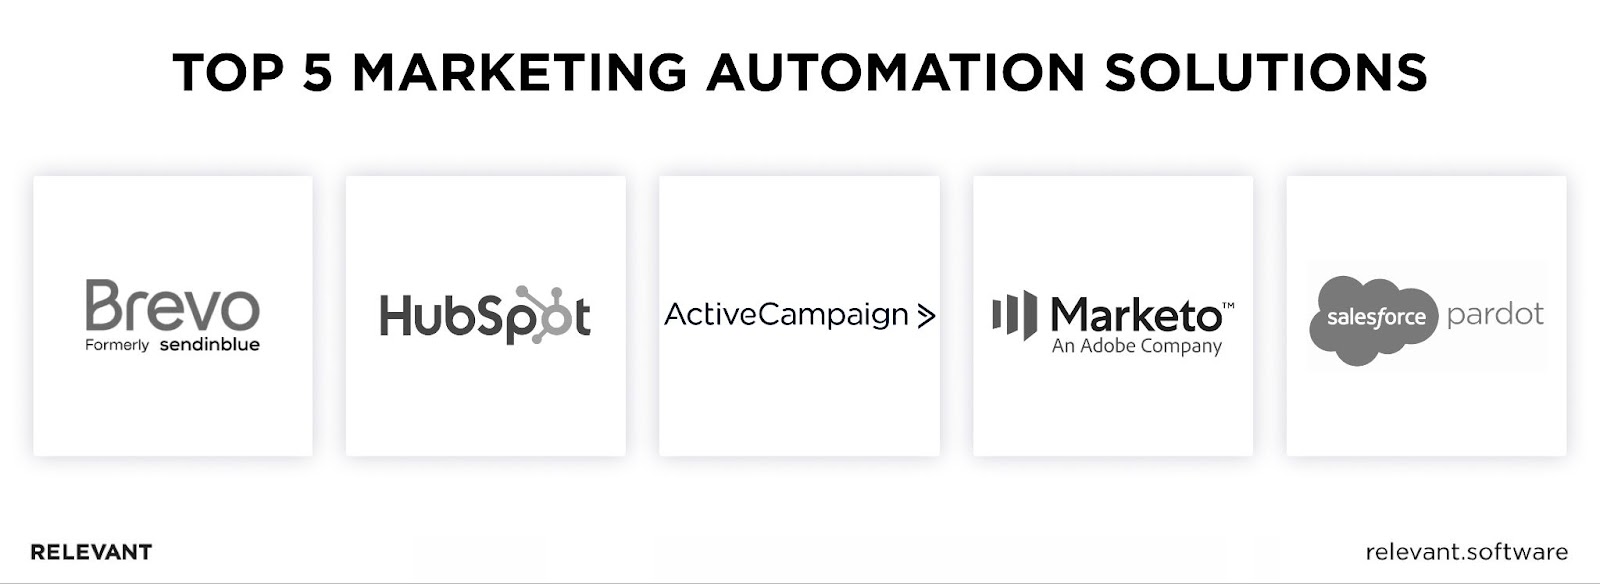 Top 5 Marketing Automation Solutions